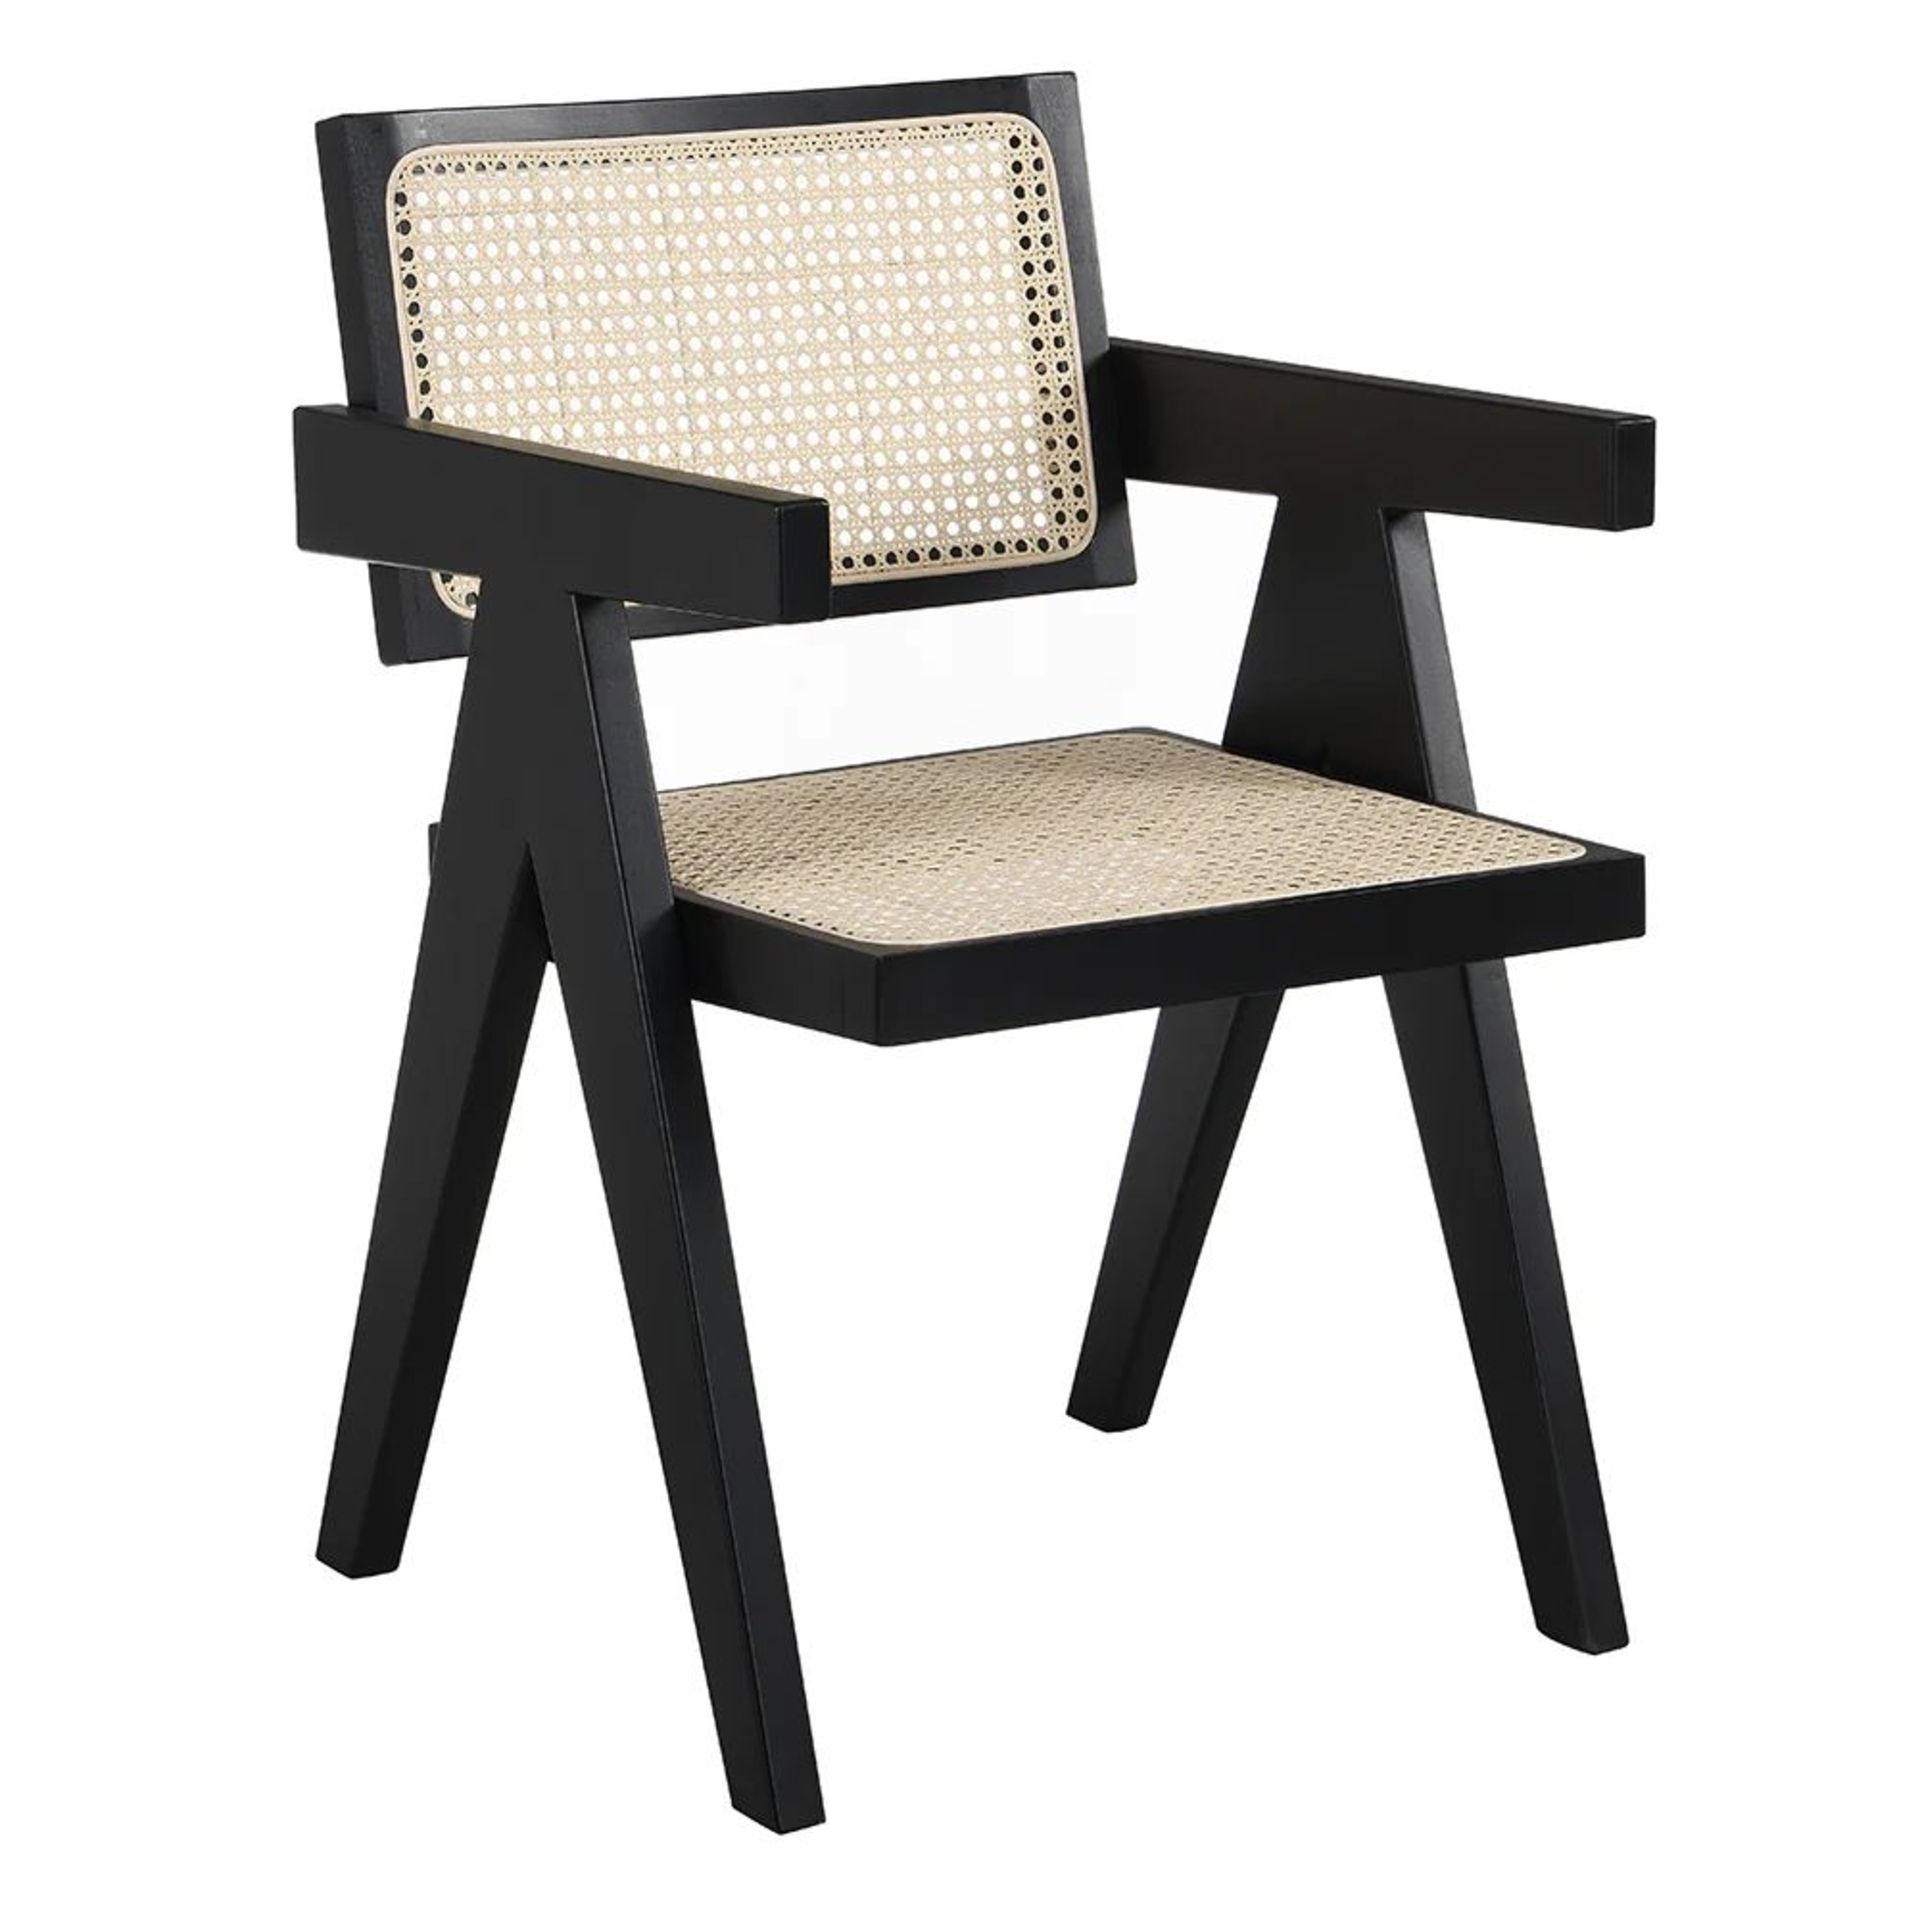 Jeanne Black Colour Cane Rattan Solid Beech Wood Dining Chair. - R19.5. RRP £239.99. The cane rattan - Image 2 of 2